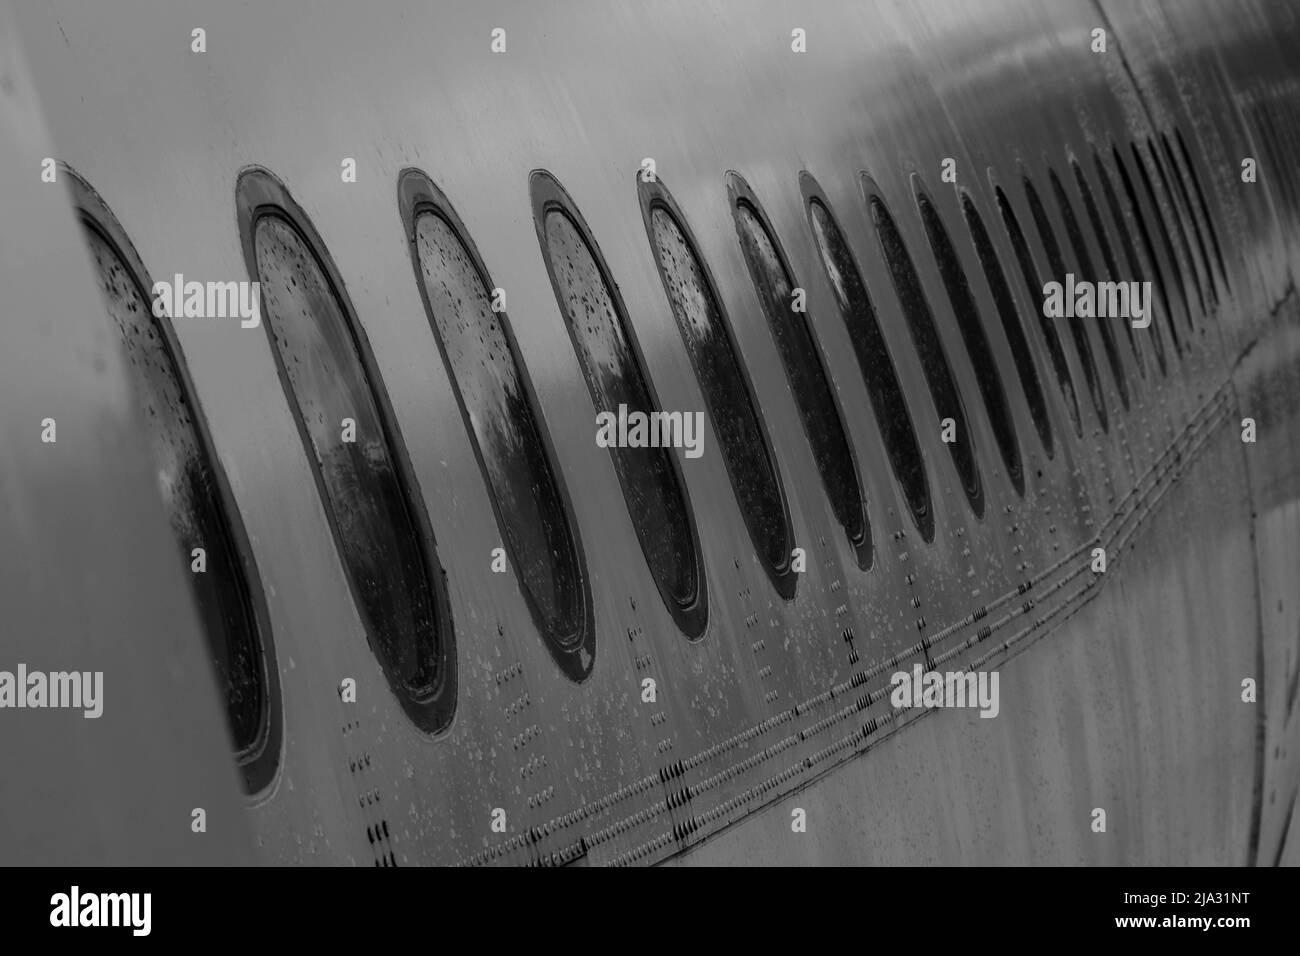 View of the plane's fuselage and many windows soaked in the rain. Stock Photo